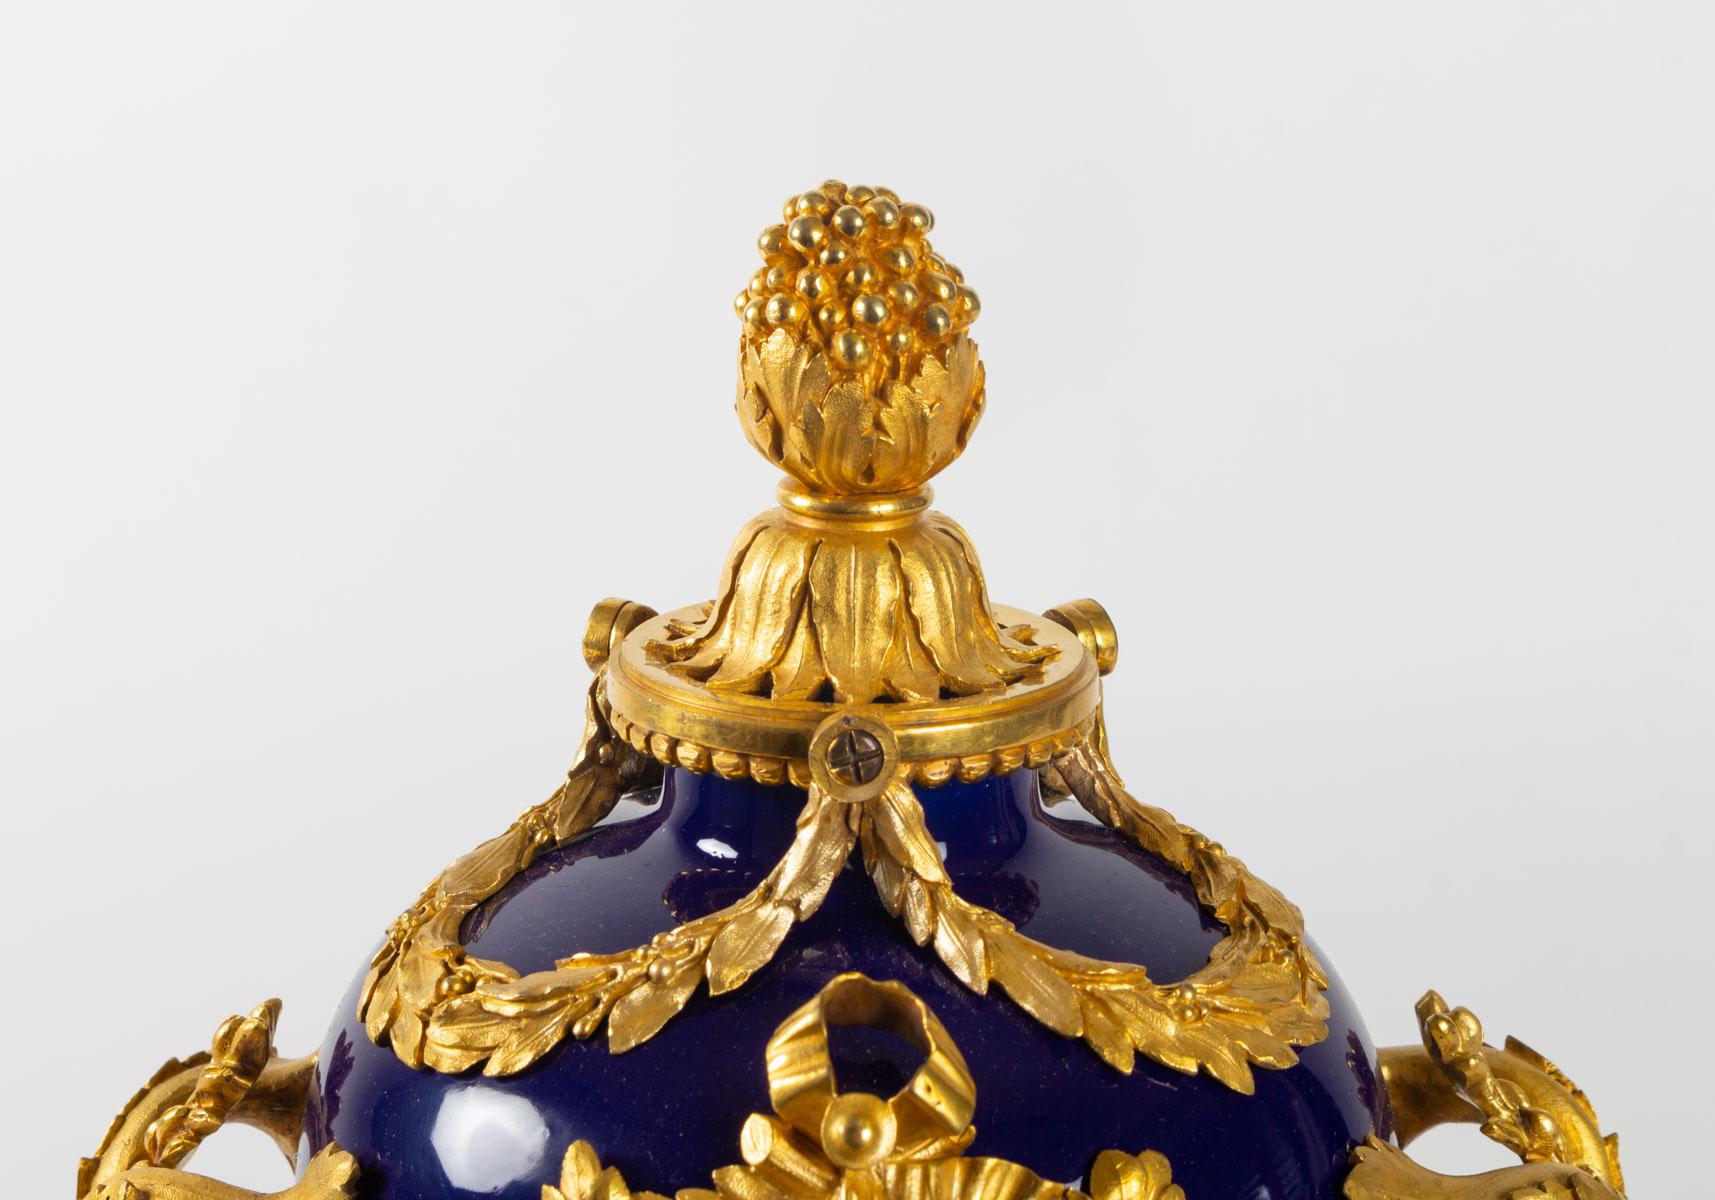 19th Century Superb Clock, Giltbronze and Blue Enamel by Beurdeley, Paris, France, circa 1850 For Sale